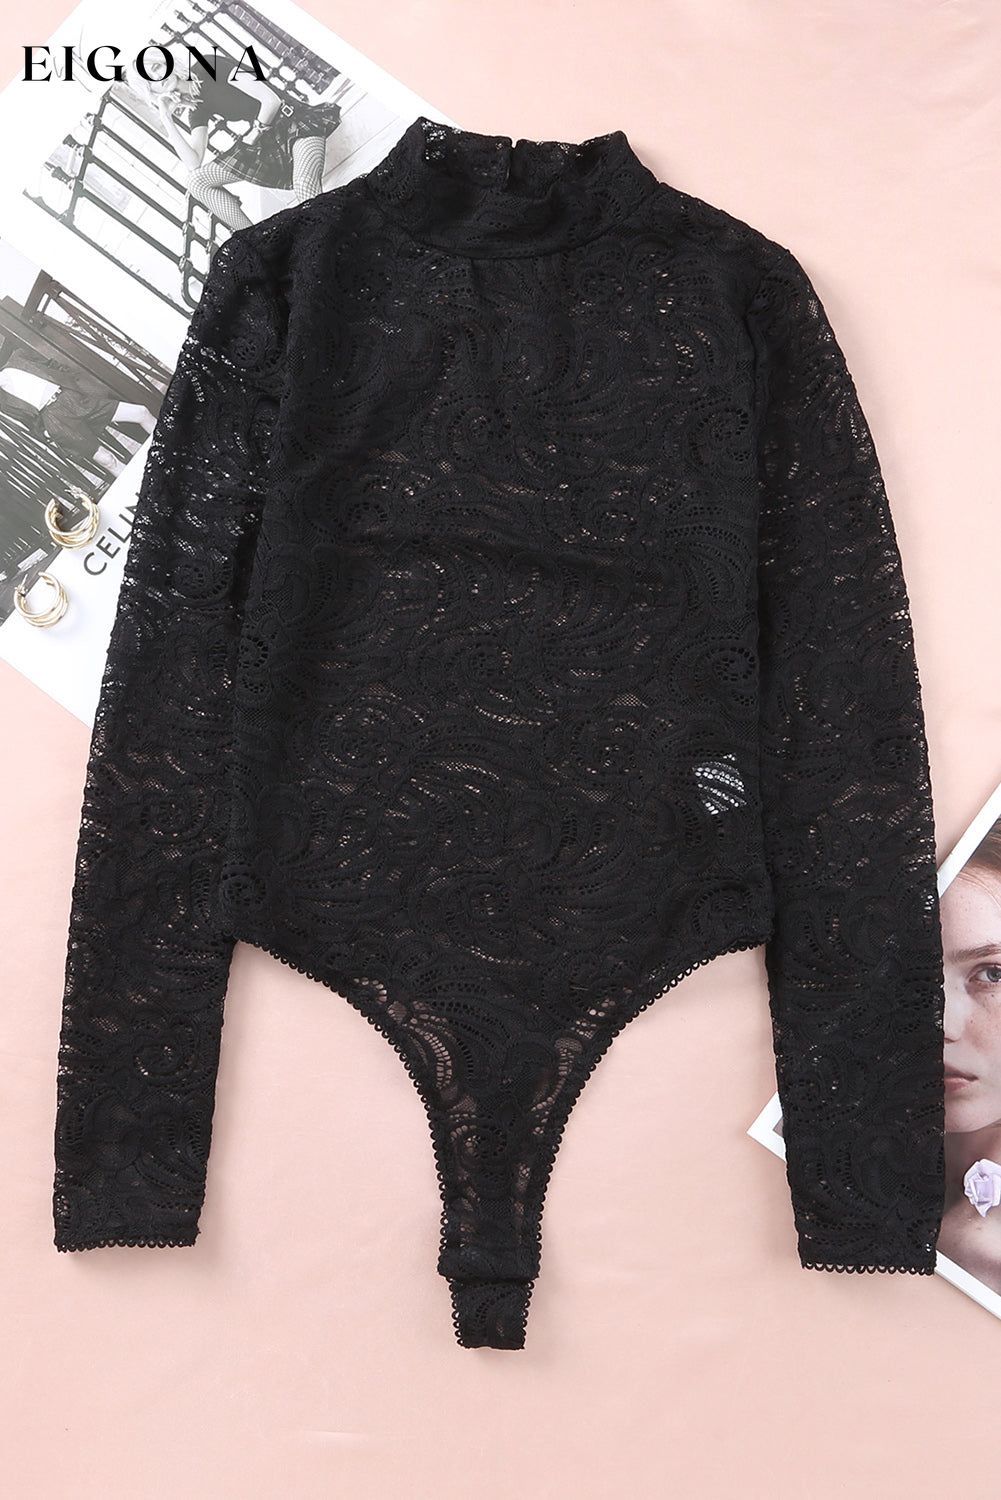 Black Long Sleeve High Neck Skinny Lace Bodysuit bodysuits clothes long sleeve long sleeve shirts long sleeve top Occasion Rock & Music Season Fall & Autumn shirts trend